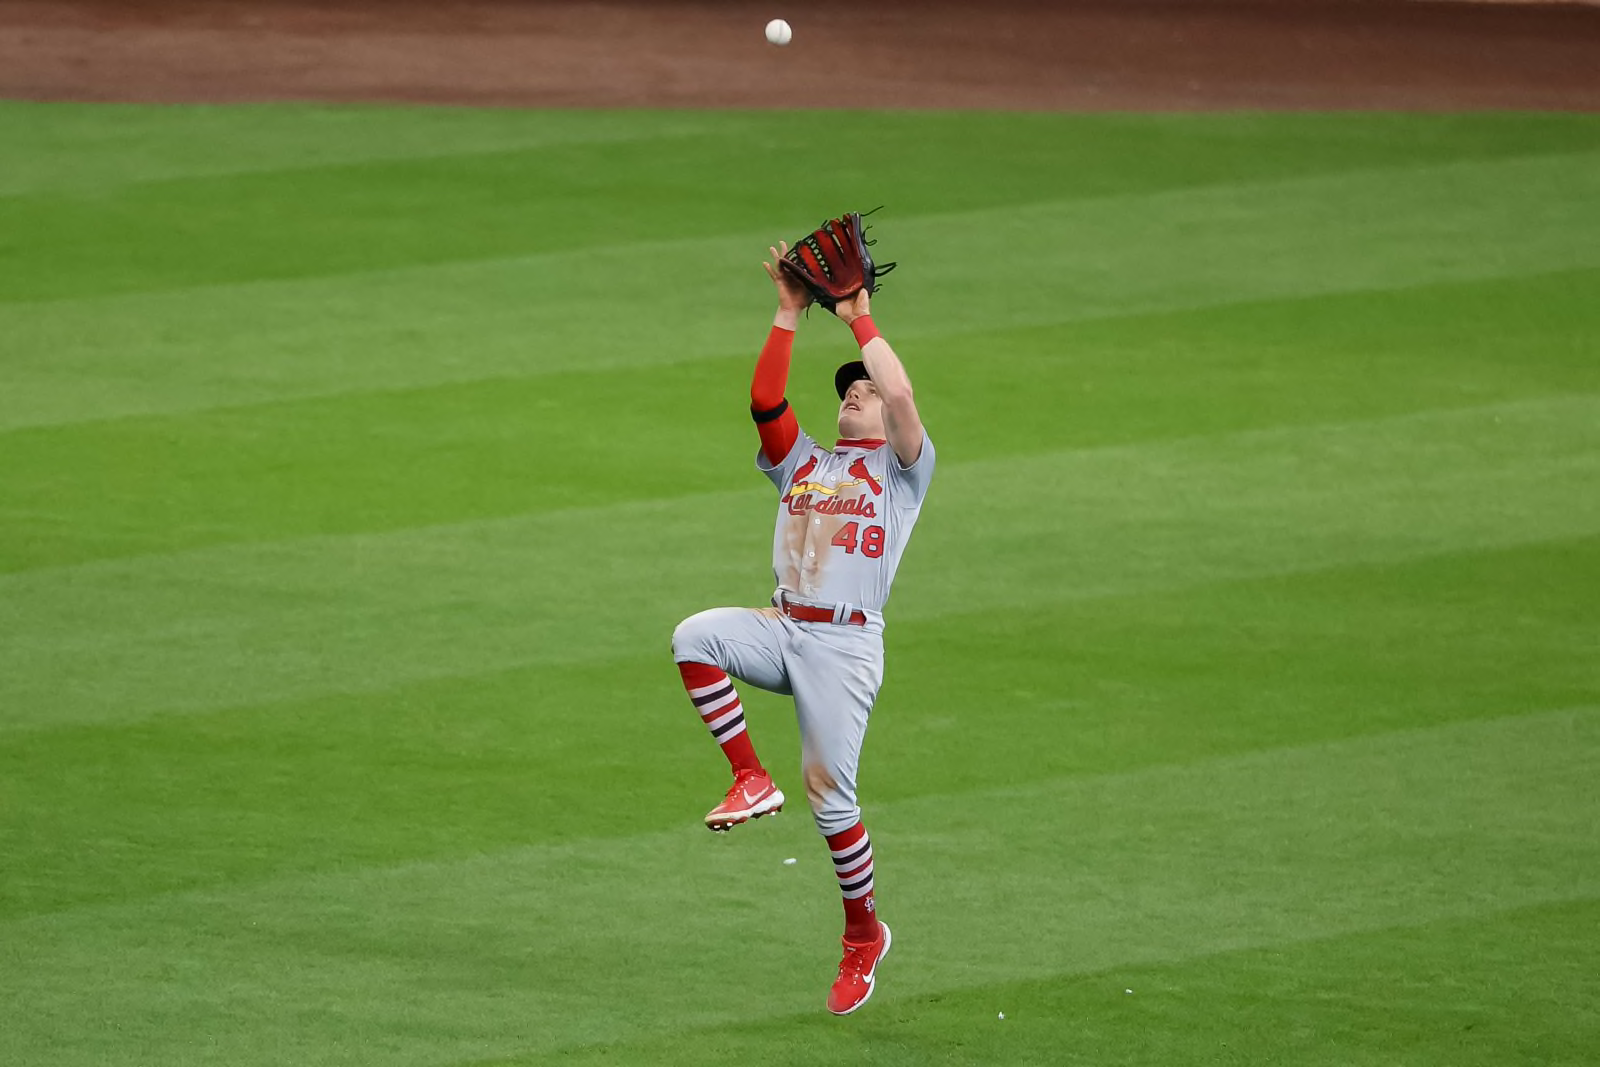 The St. Louis Cardinals grade well in Outs Above Average in 2020